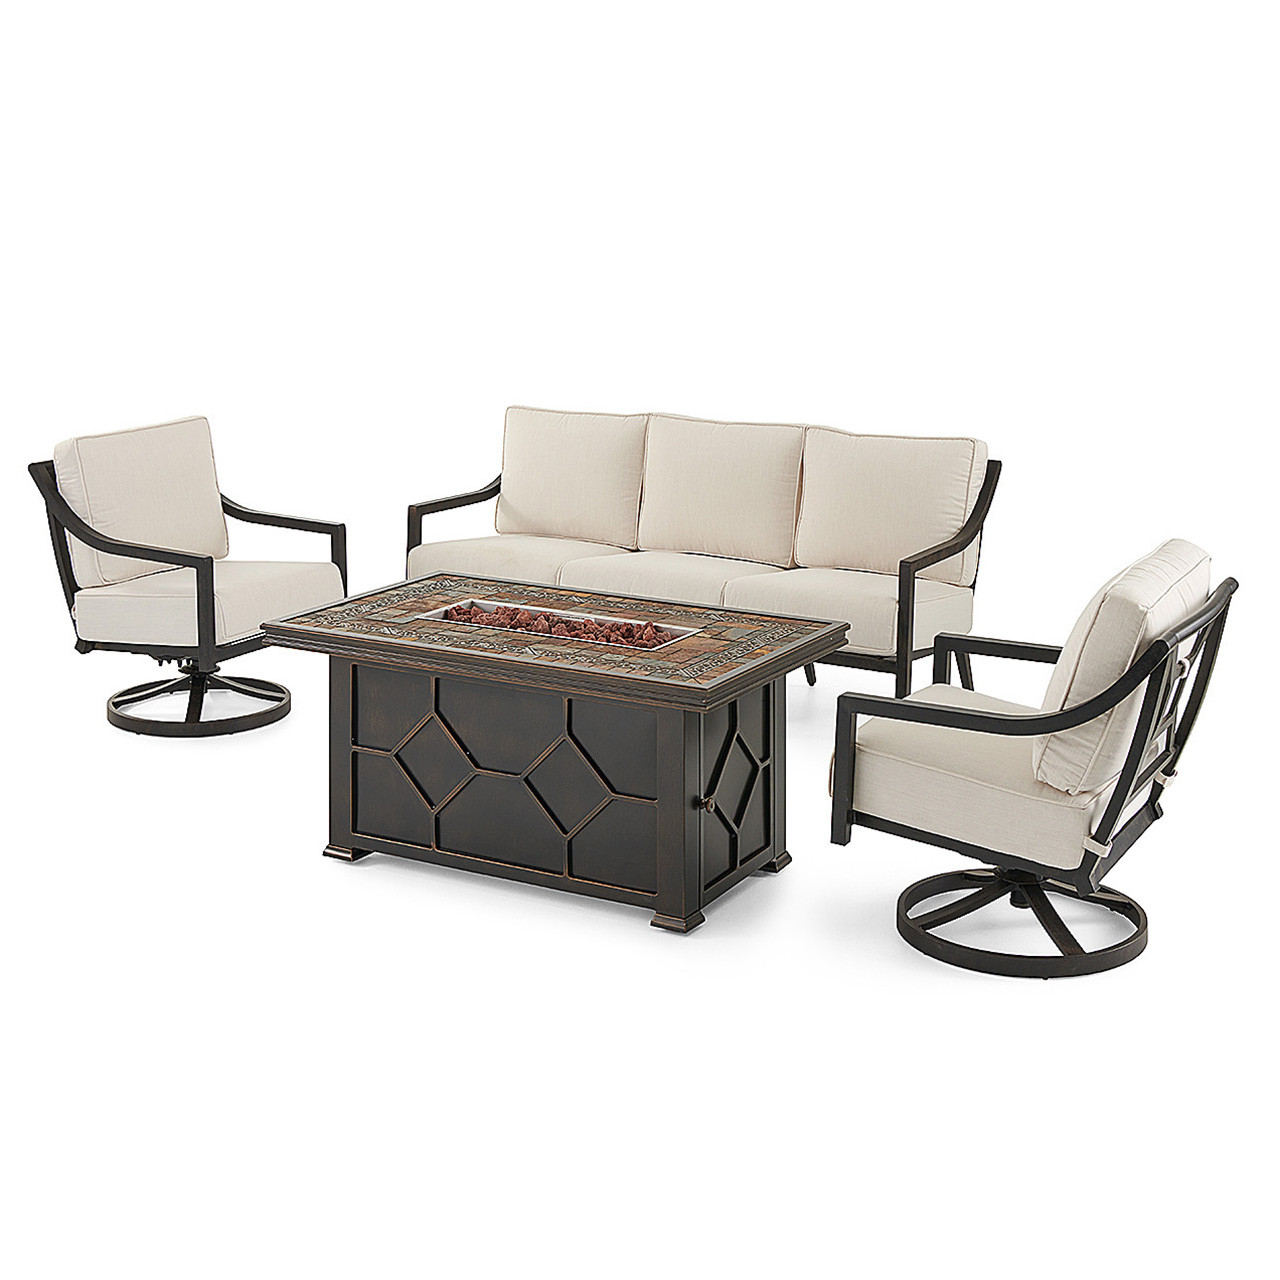 Hill Country Aged Bronze Aluminum and Cast Pumice Cushion 4 Pc. Swivel Sofa Group with 52 x 32 in. Slate Top Fire Pit Coffee Table